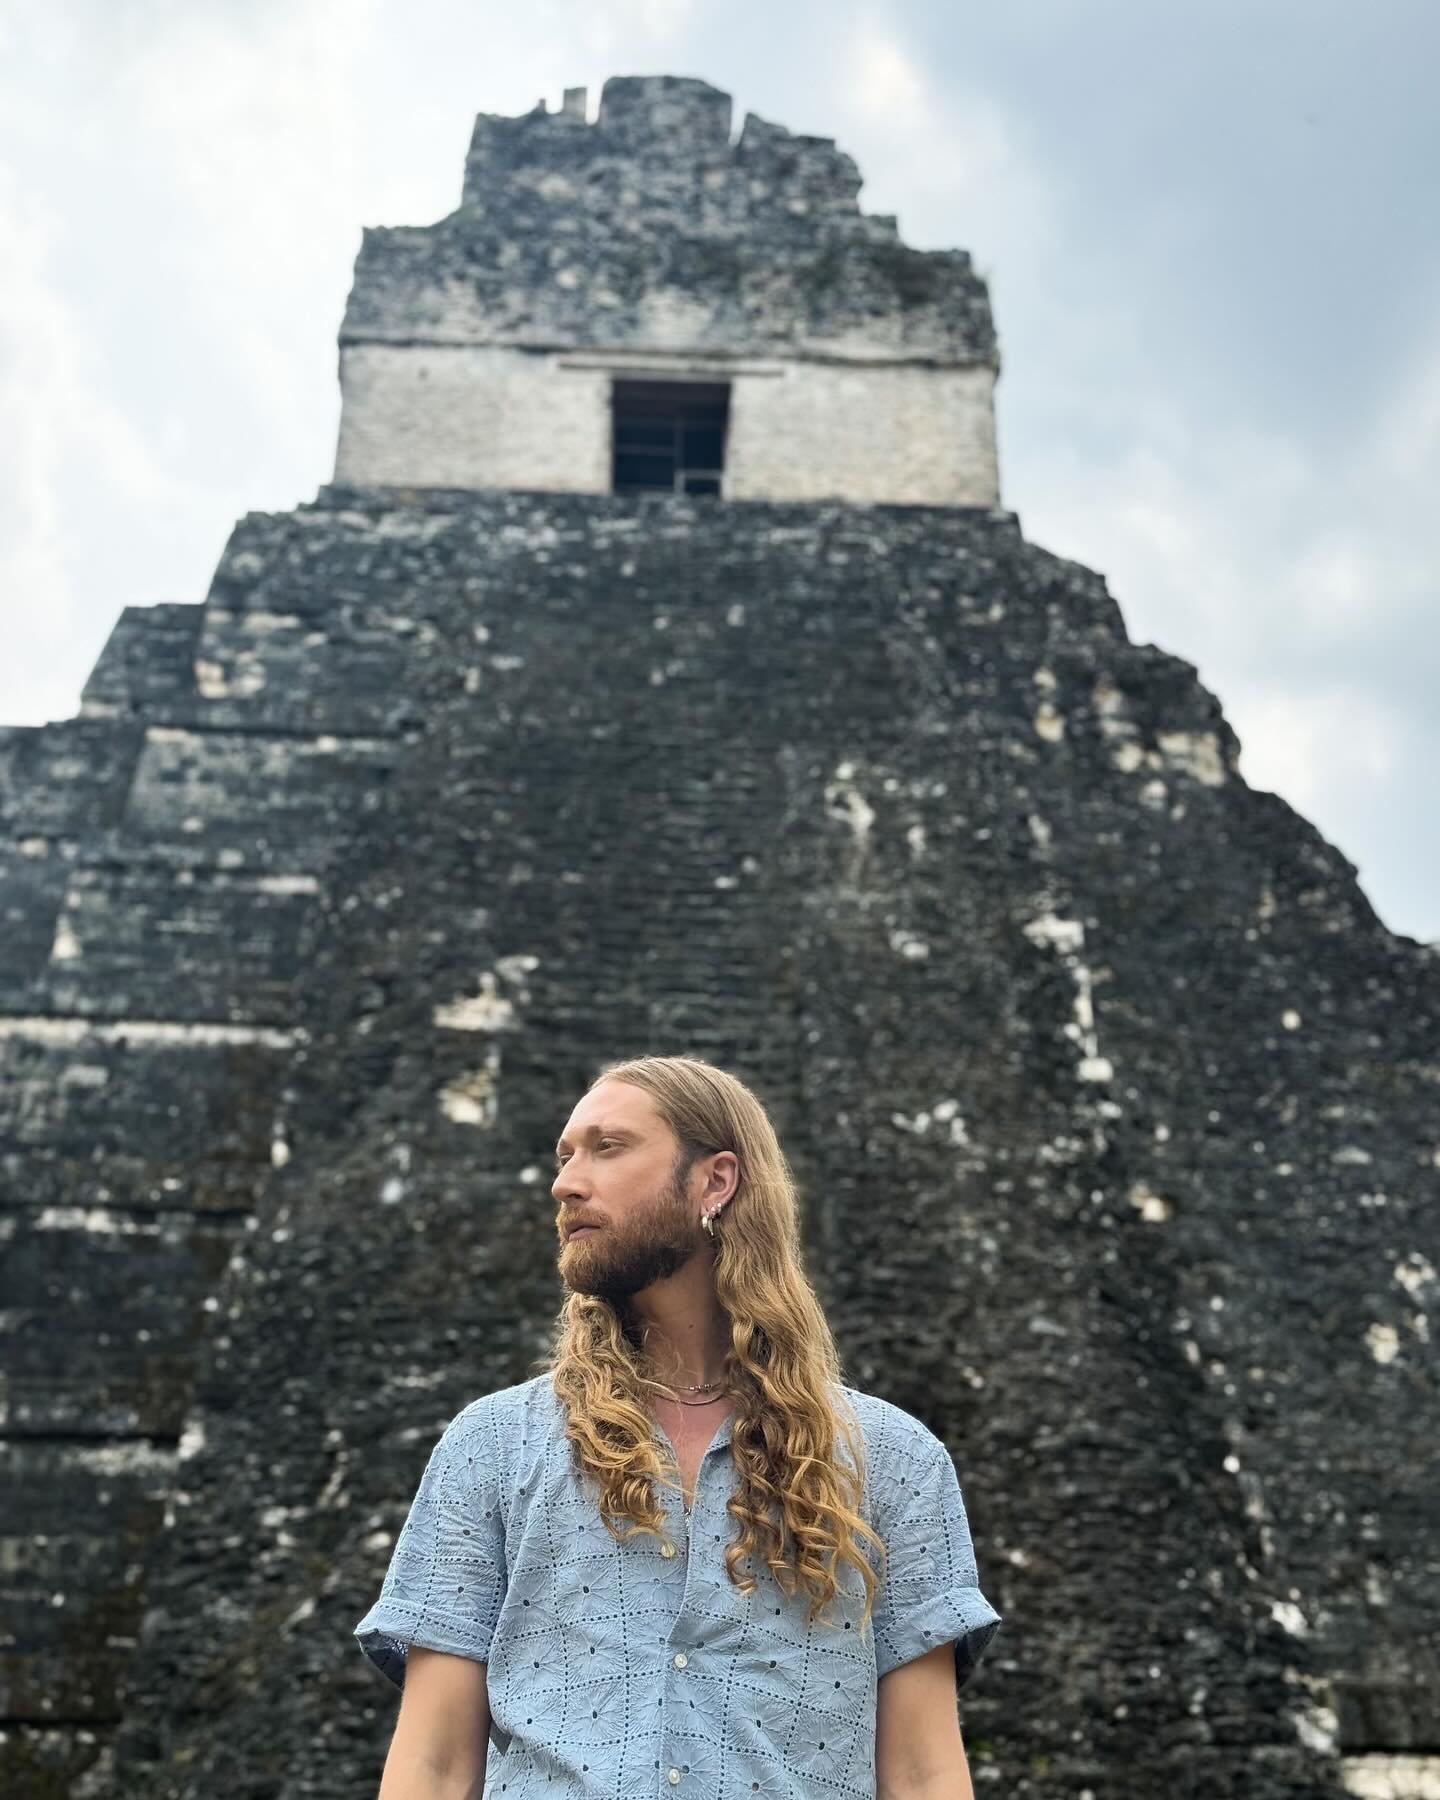 One of the biggest highlights of visiting Guatemala was getting to see the Temples &amp; Pyramids of Tikal. I remember seeing photos of this place in National Geographic as a kid and it was even more magical in person on my @gadventures tour! 

Weari